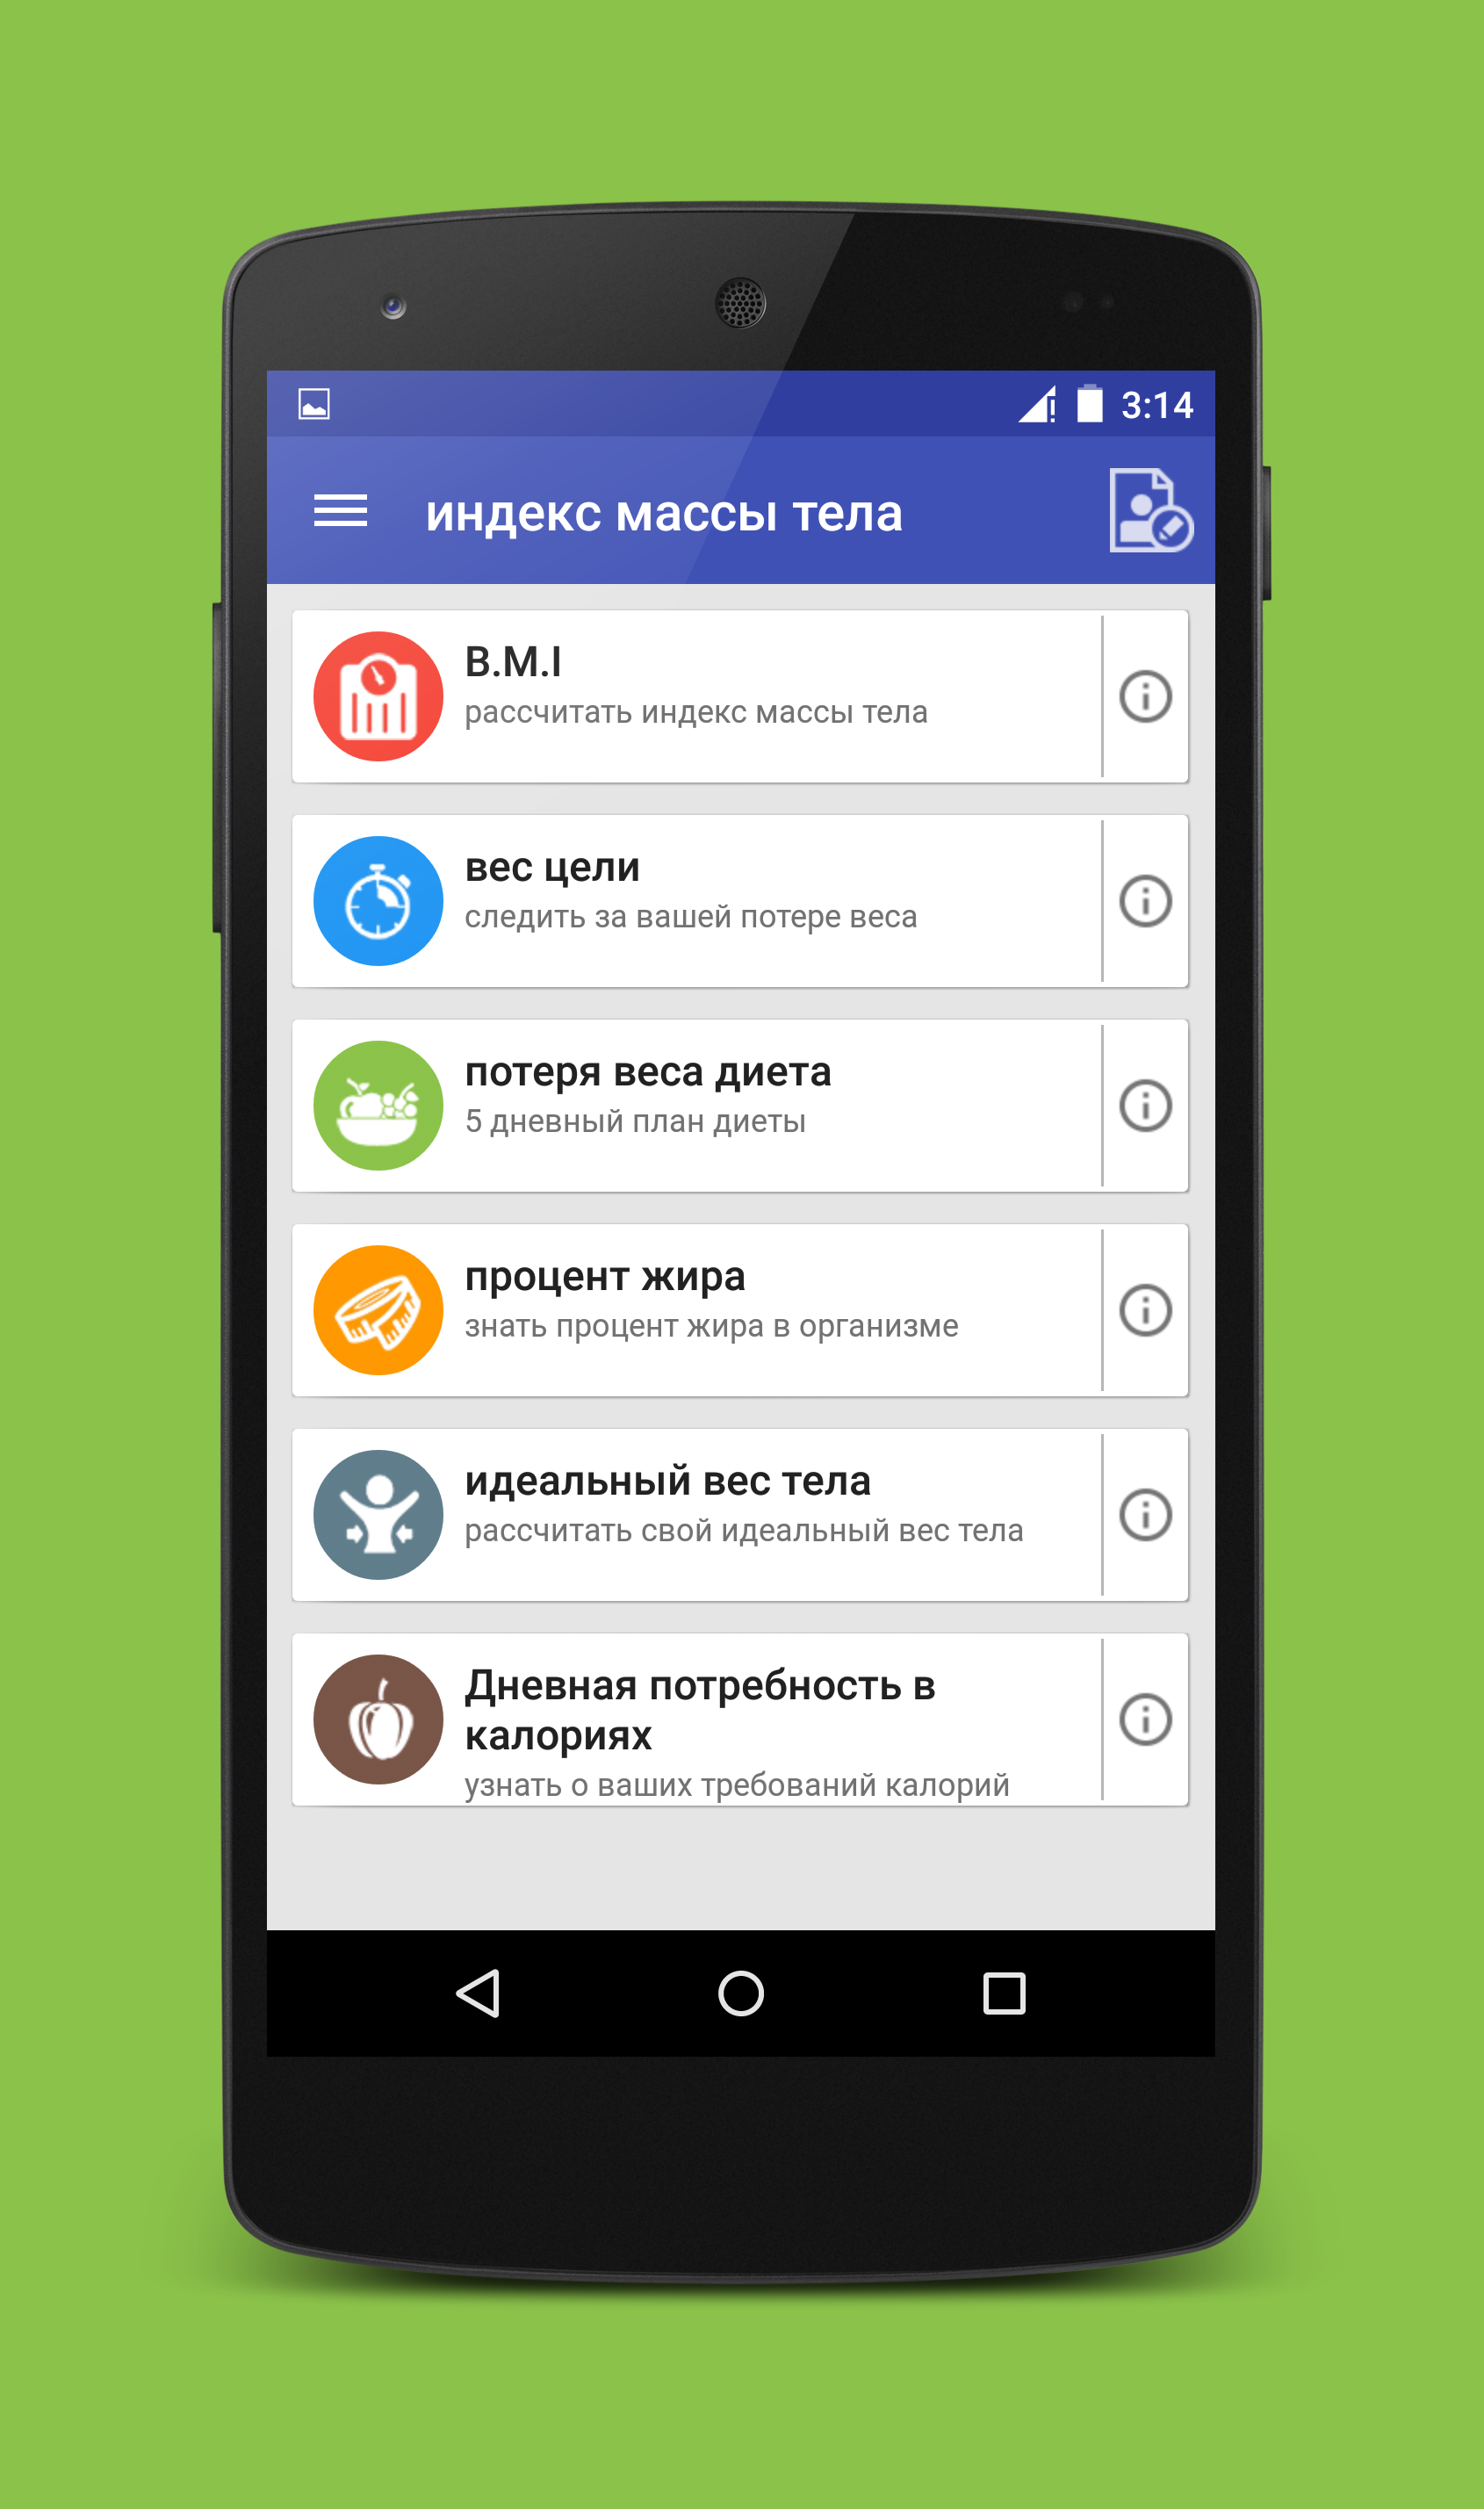 Android application Body Mass Index - Weight loss, Calorie Counter screenshort